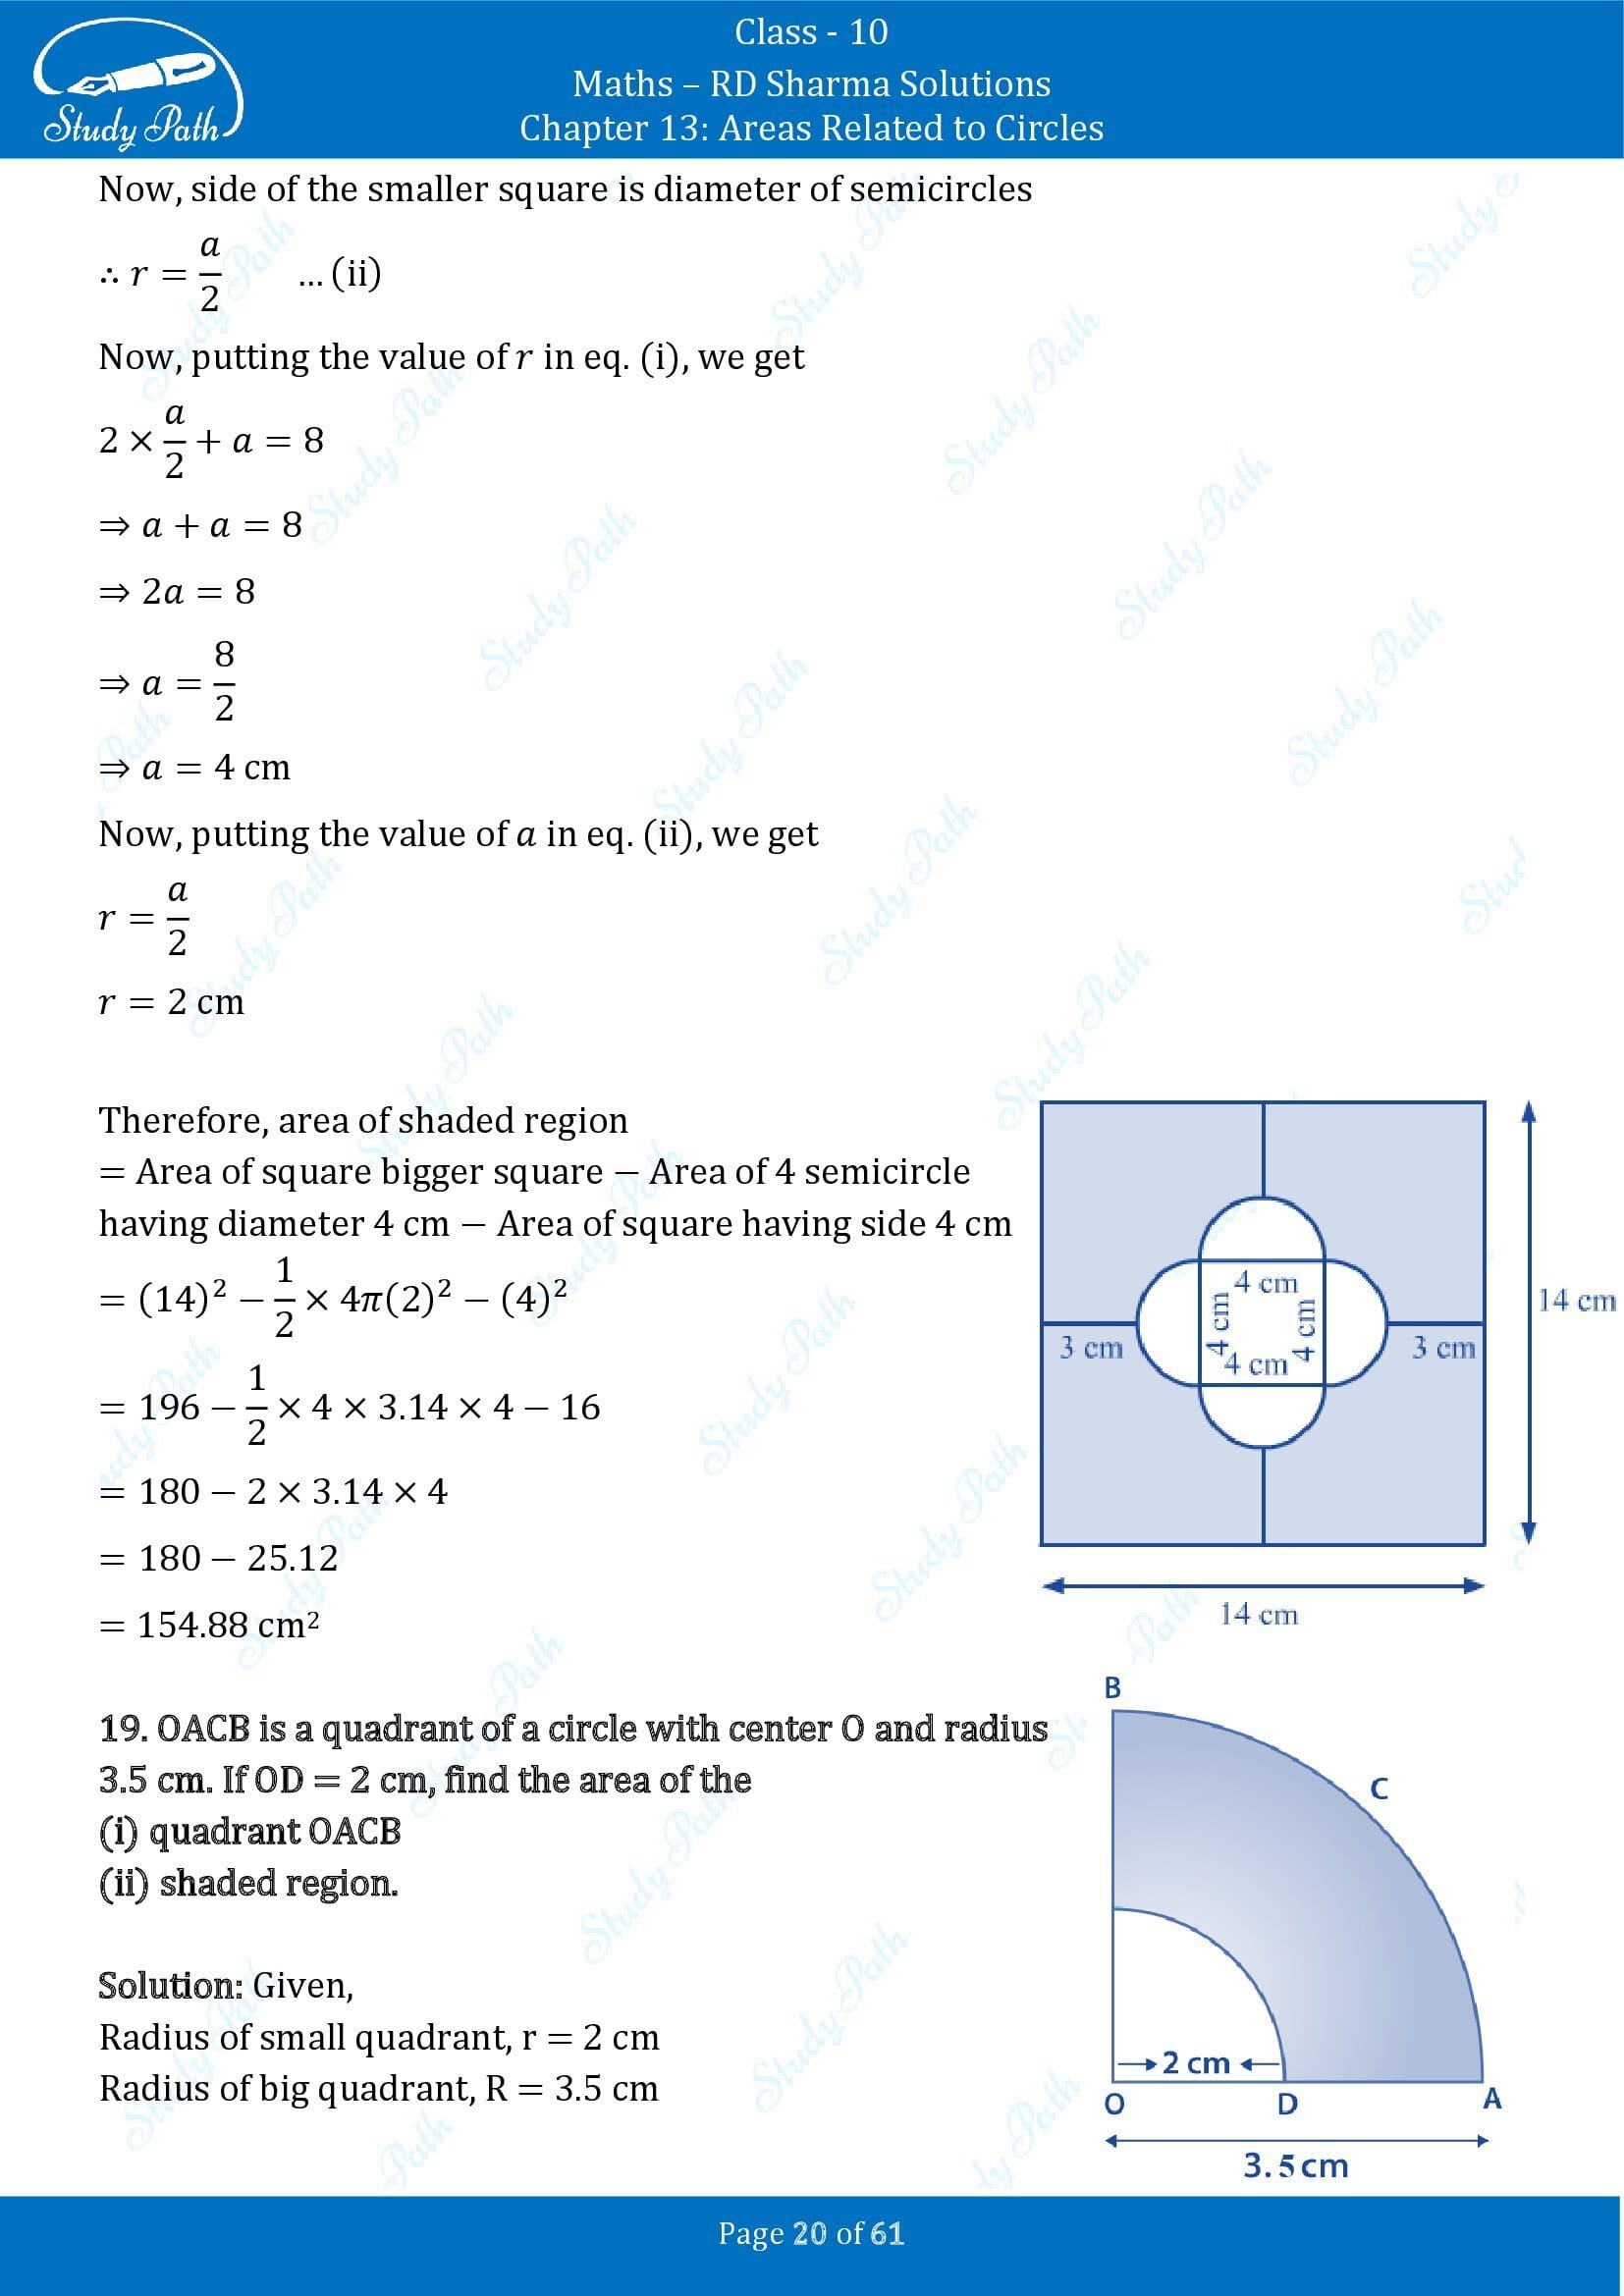 RD Sharma Solutions Class 10 Chapter 13 Areas Related to Circles Exercise 13.4 00020